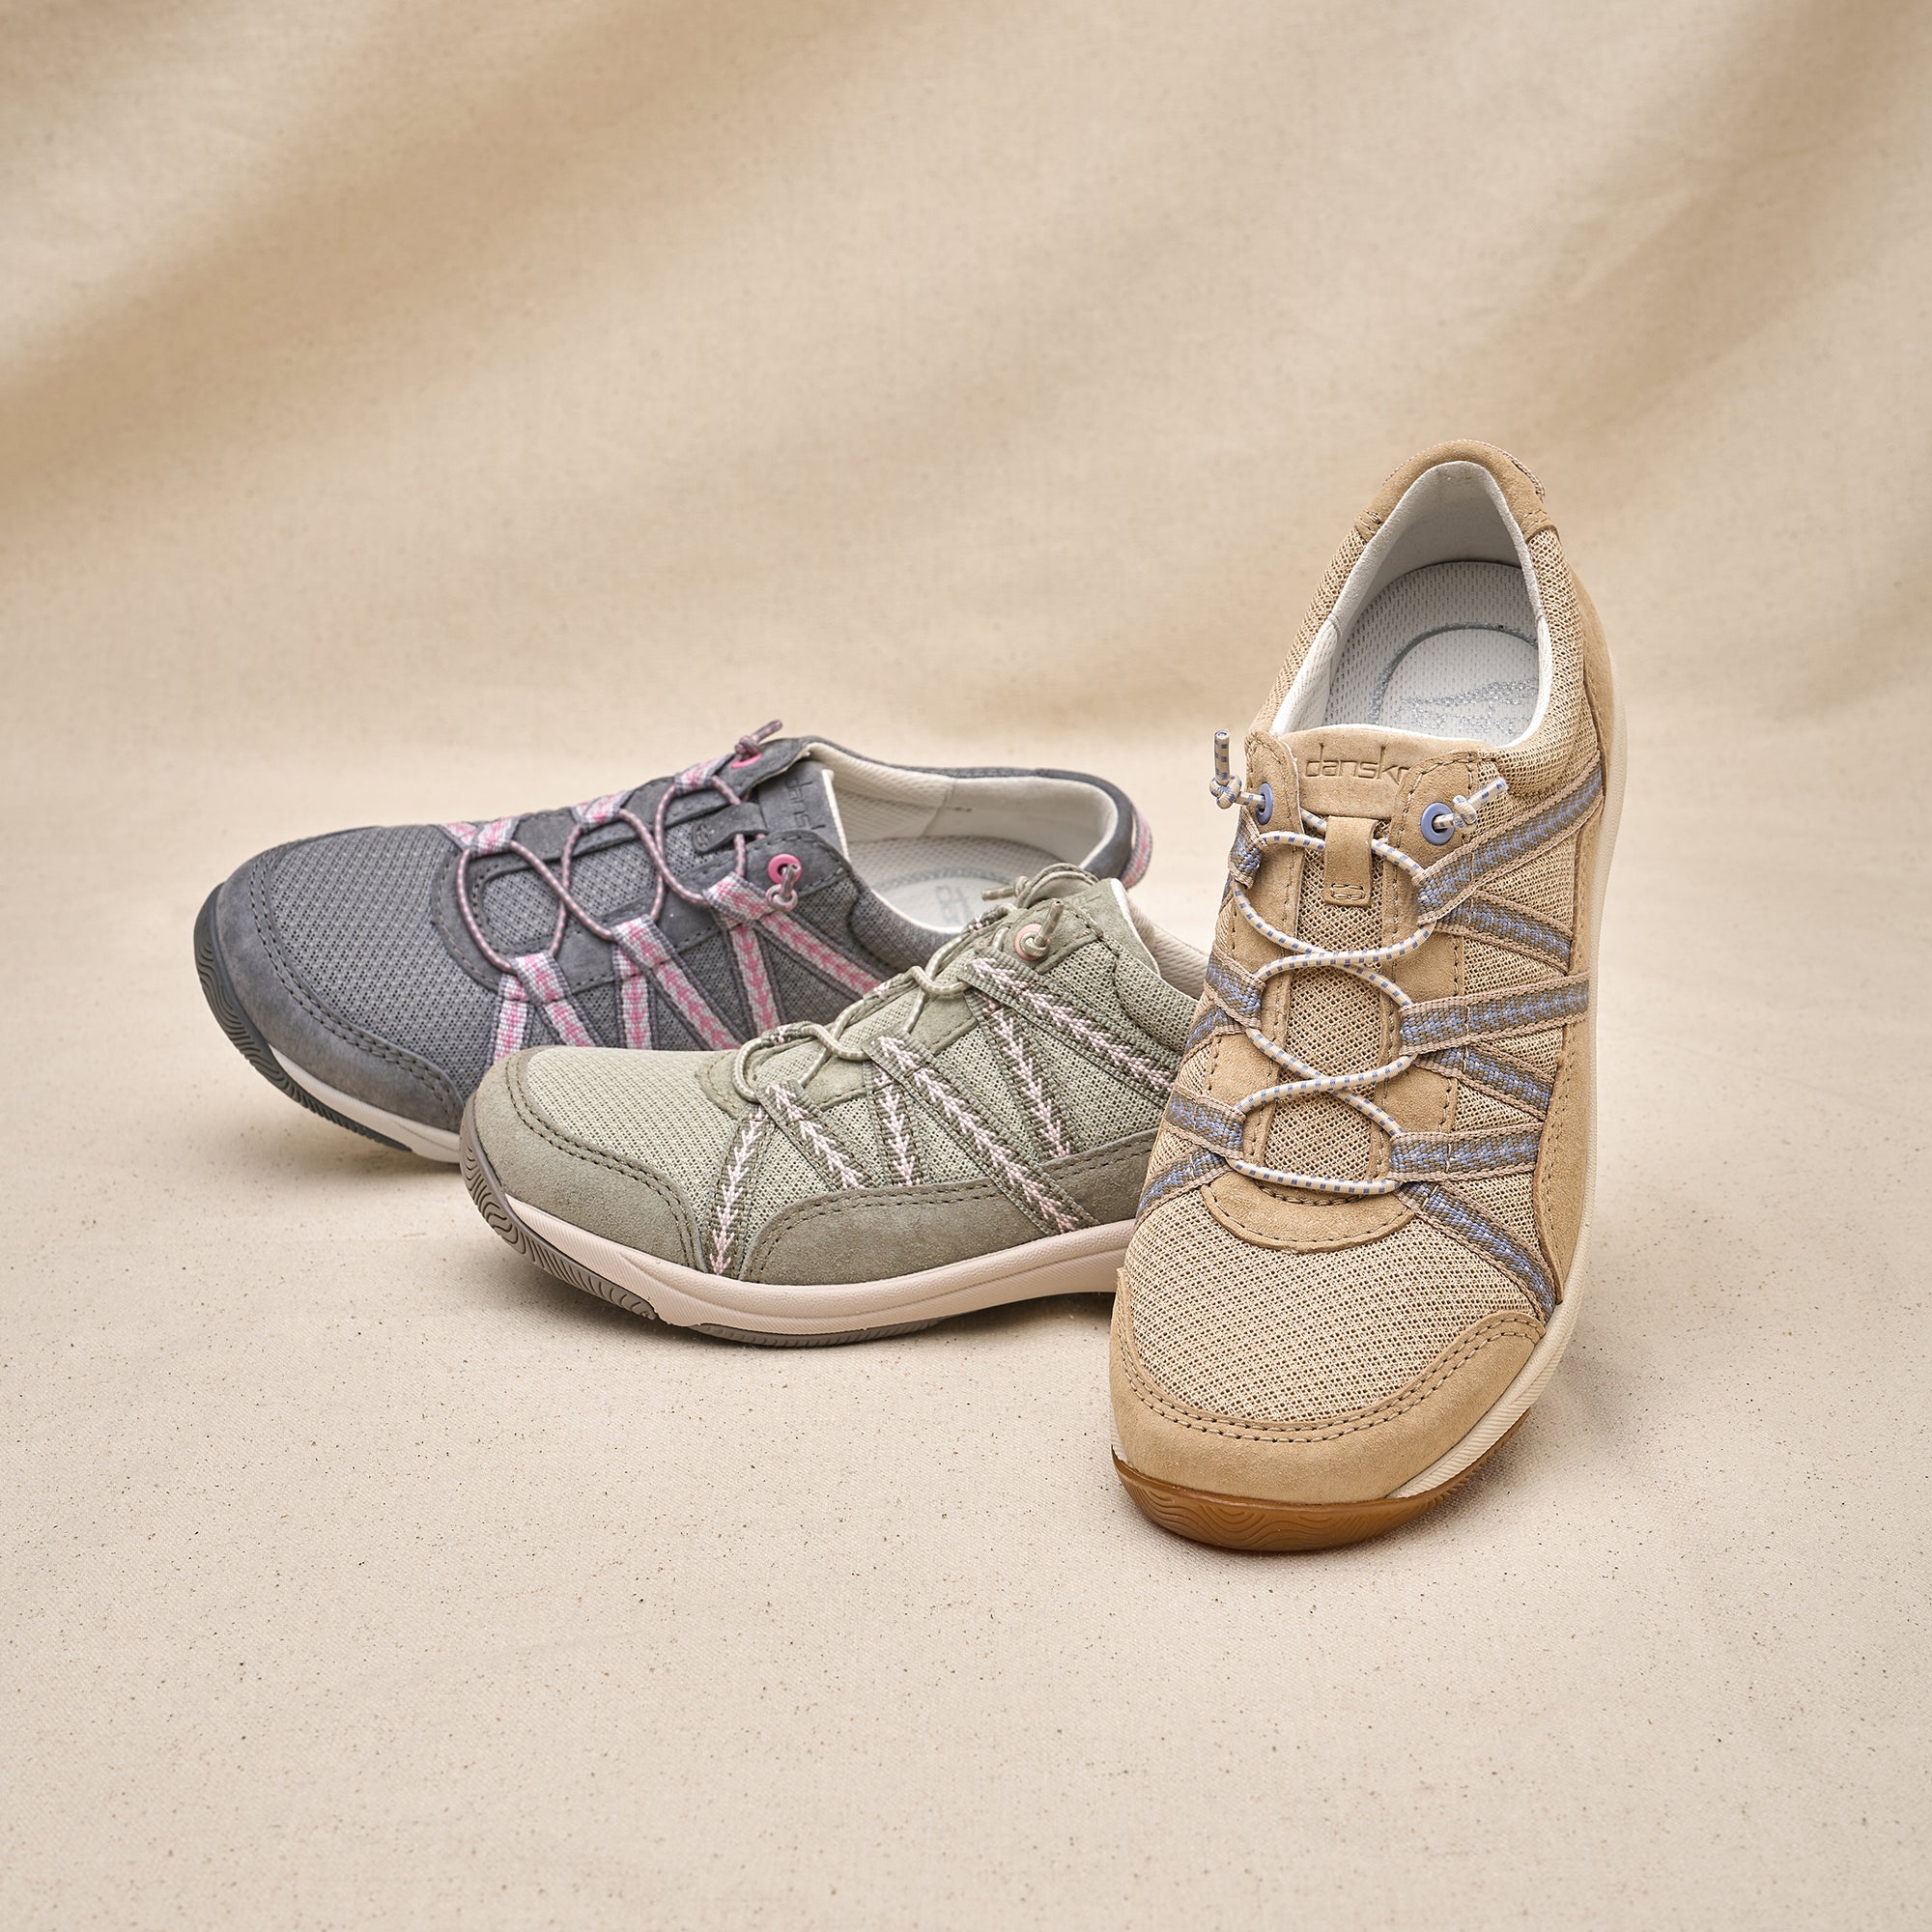 A compact, lightweight sneaker with elastic laces shown in neutrals of gray, ivy, and tan.